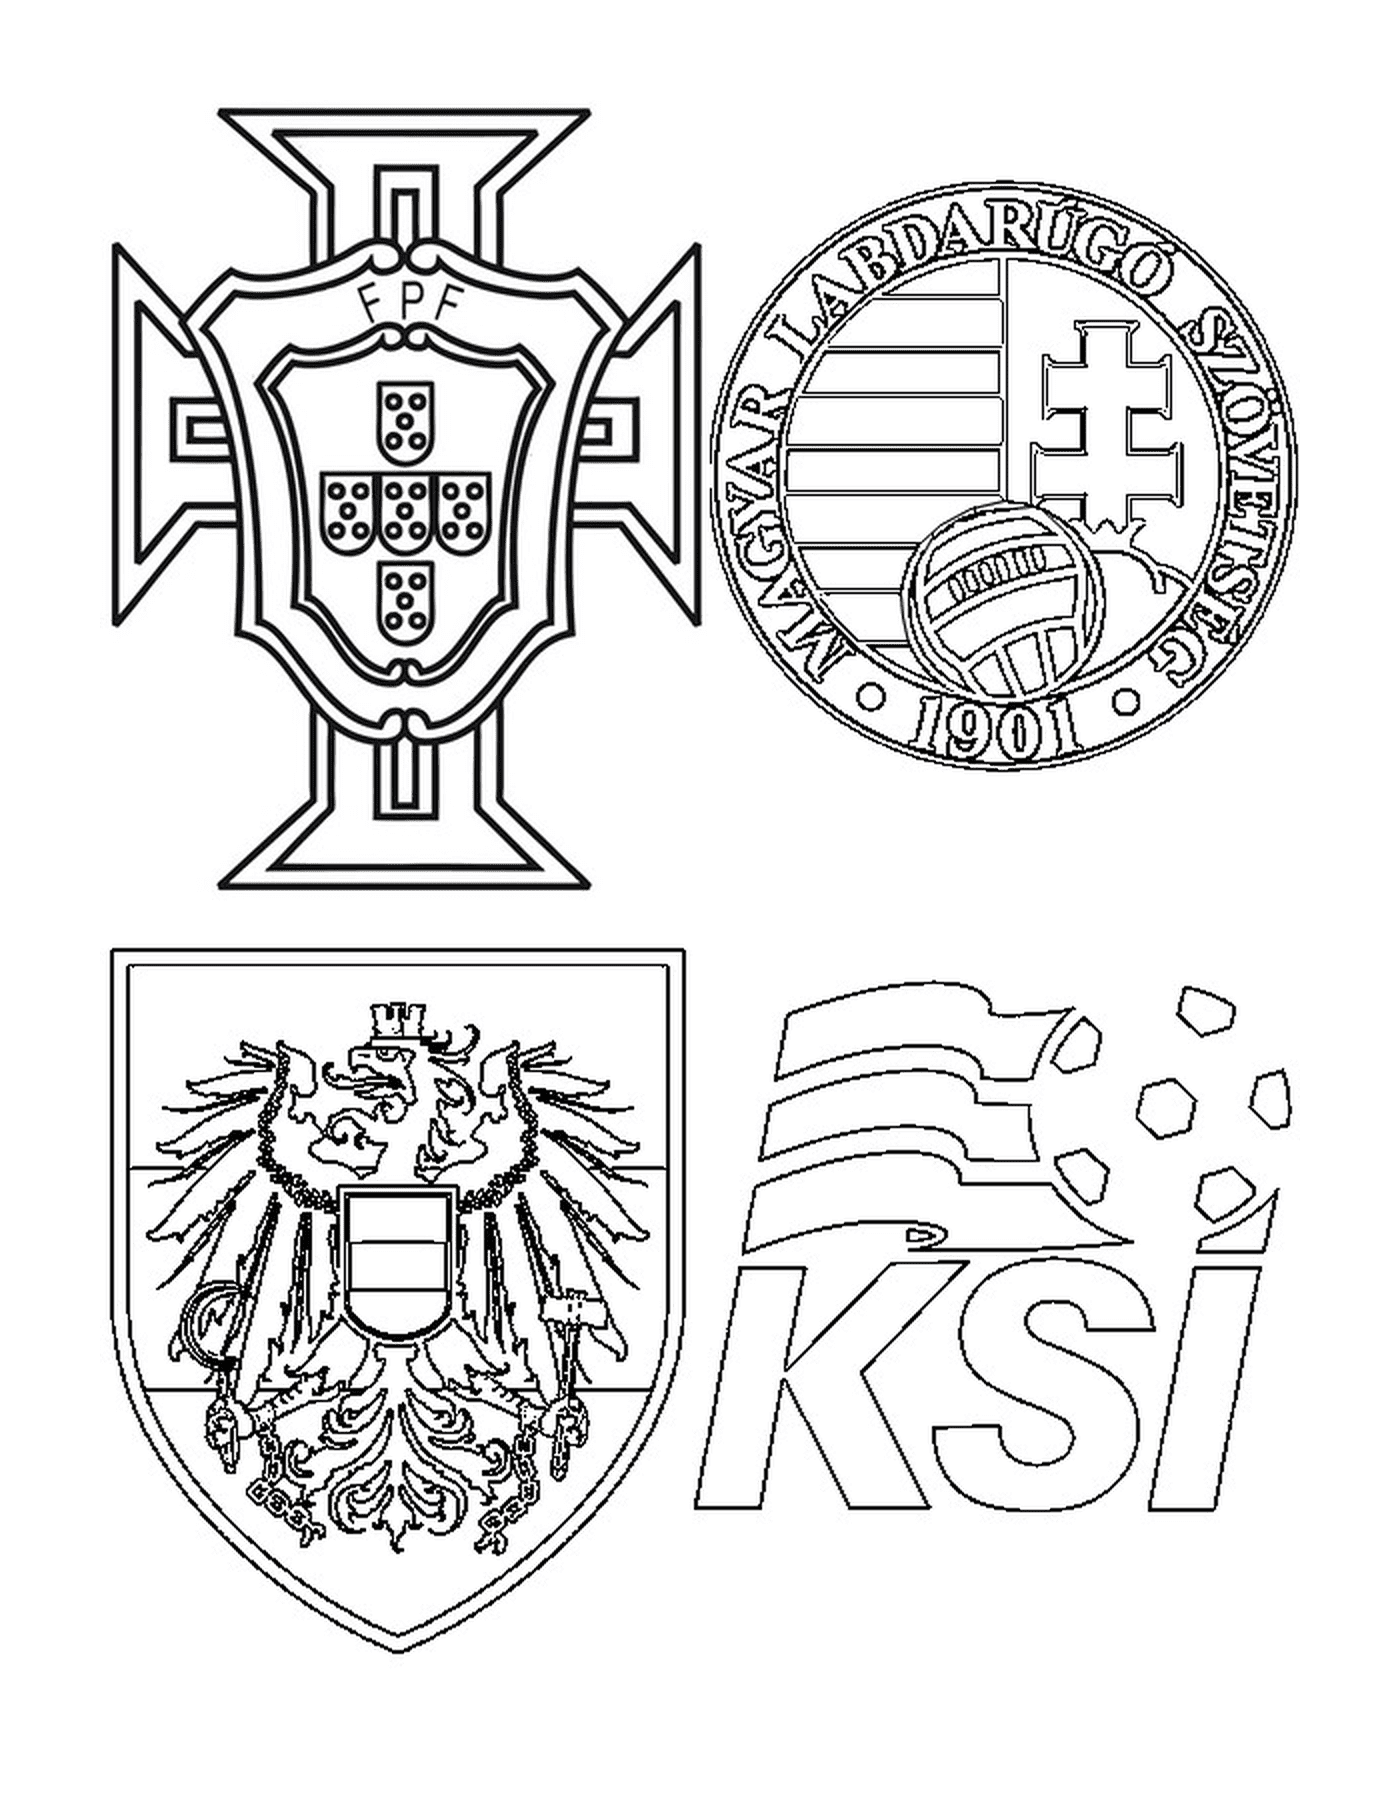  Four coats of arms in black and white 